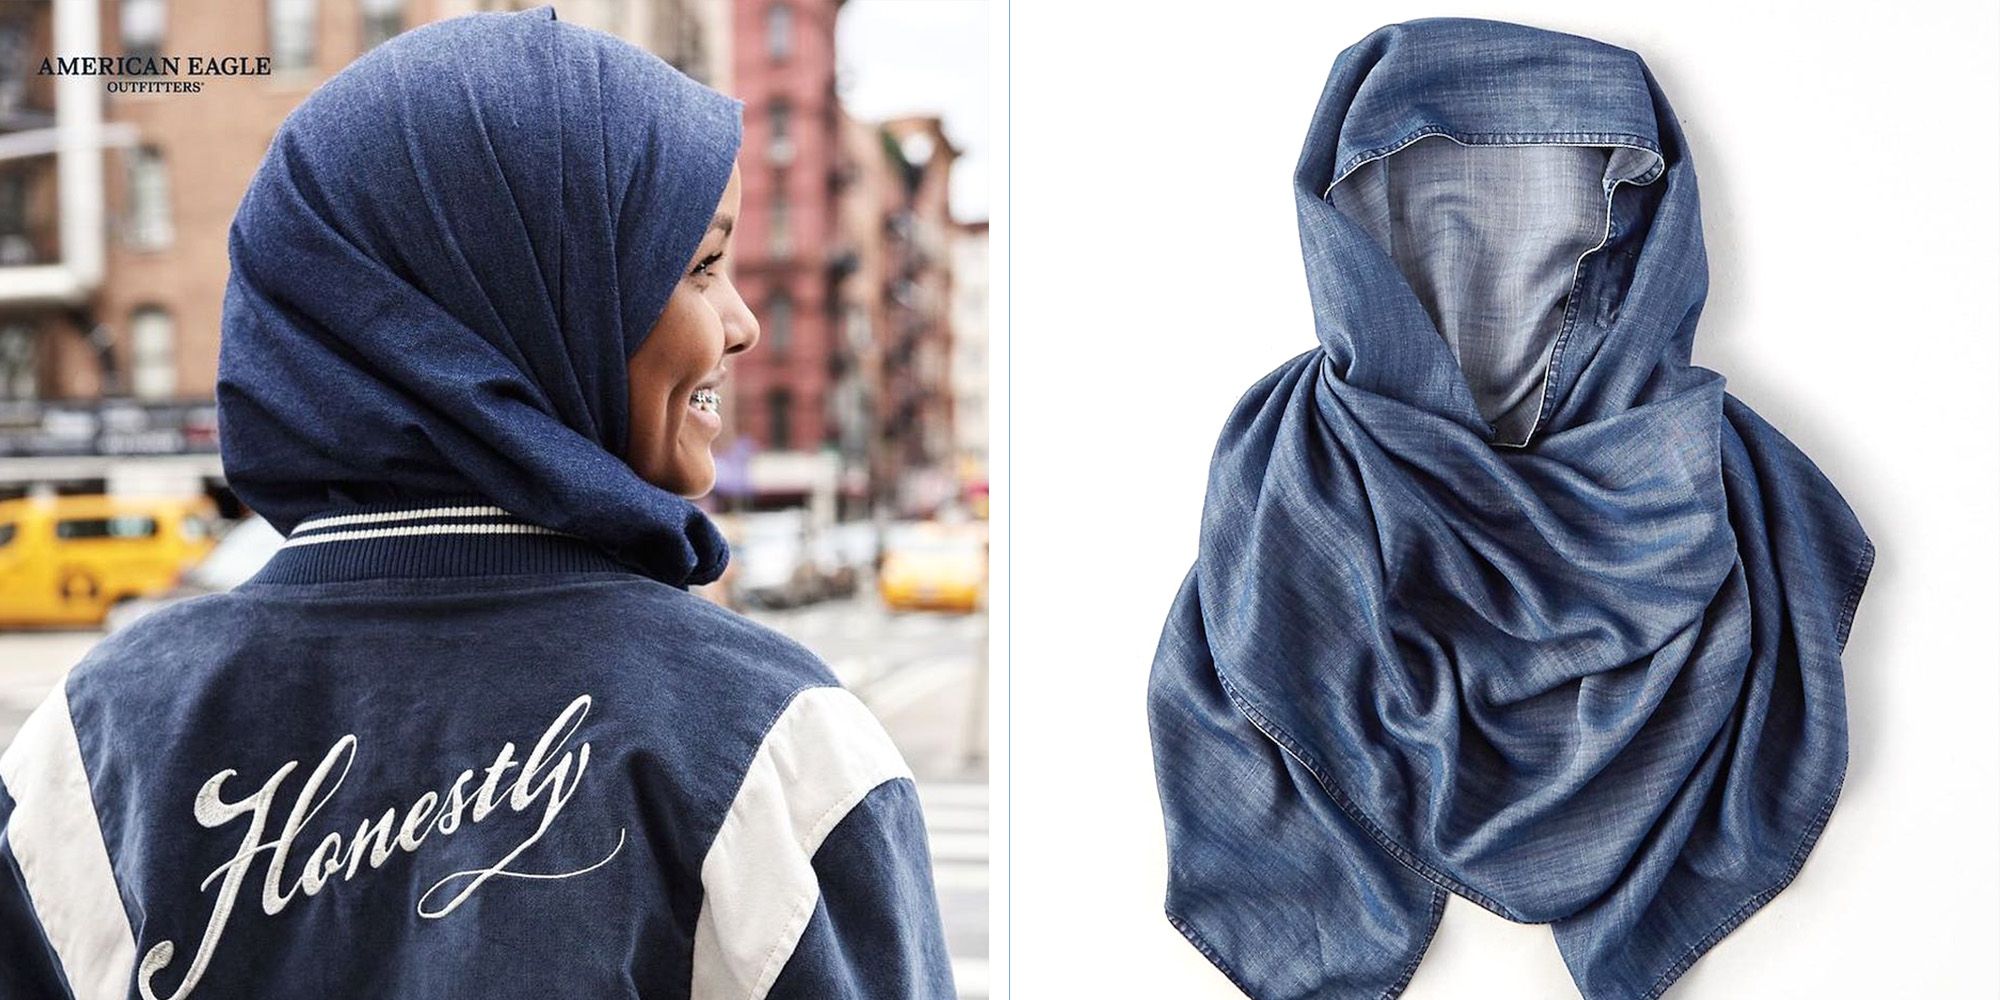 American Eagle Introduces a Cool Denim Hijab to Its Online Collection